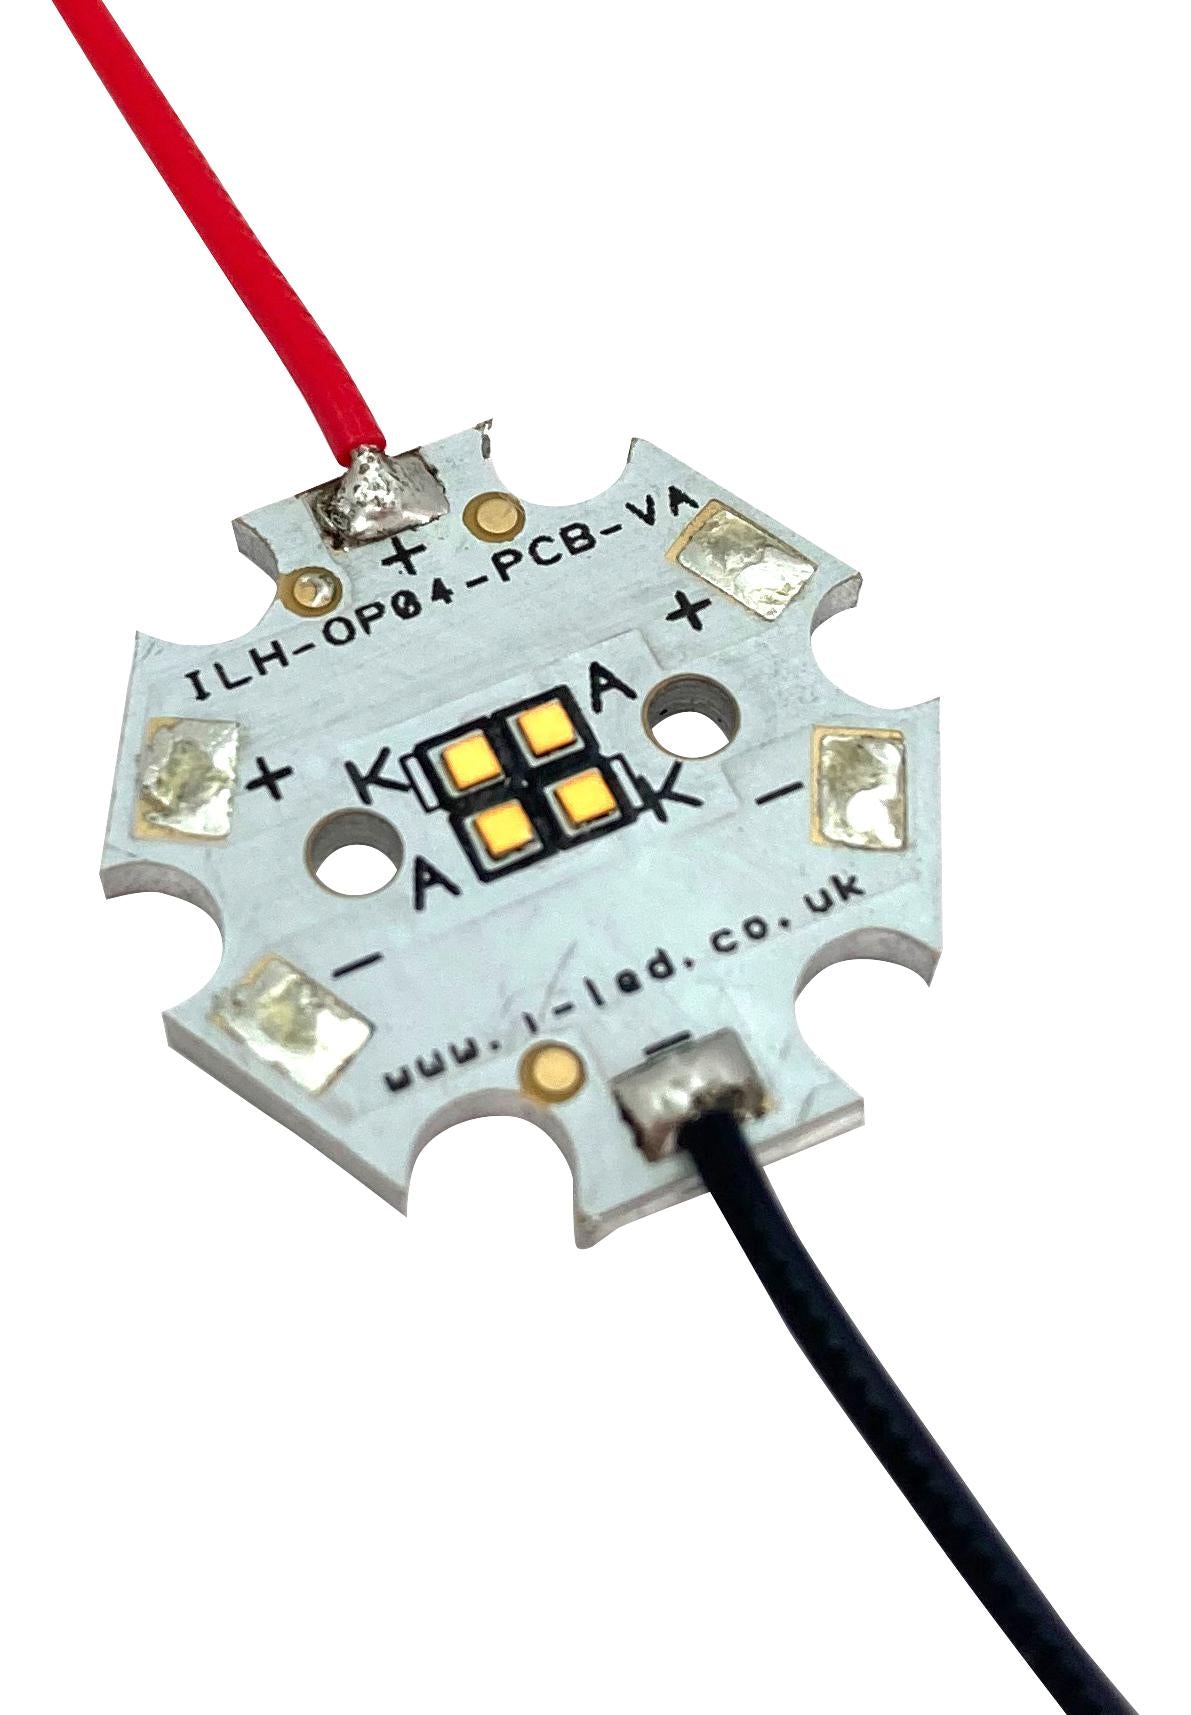 ILH-OP04-PCGR-SC221-WIR200. LED MODULE, GREEN, 1096LM, 566NM, STAR INTELLIGENT LED SOLUTIONS